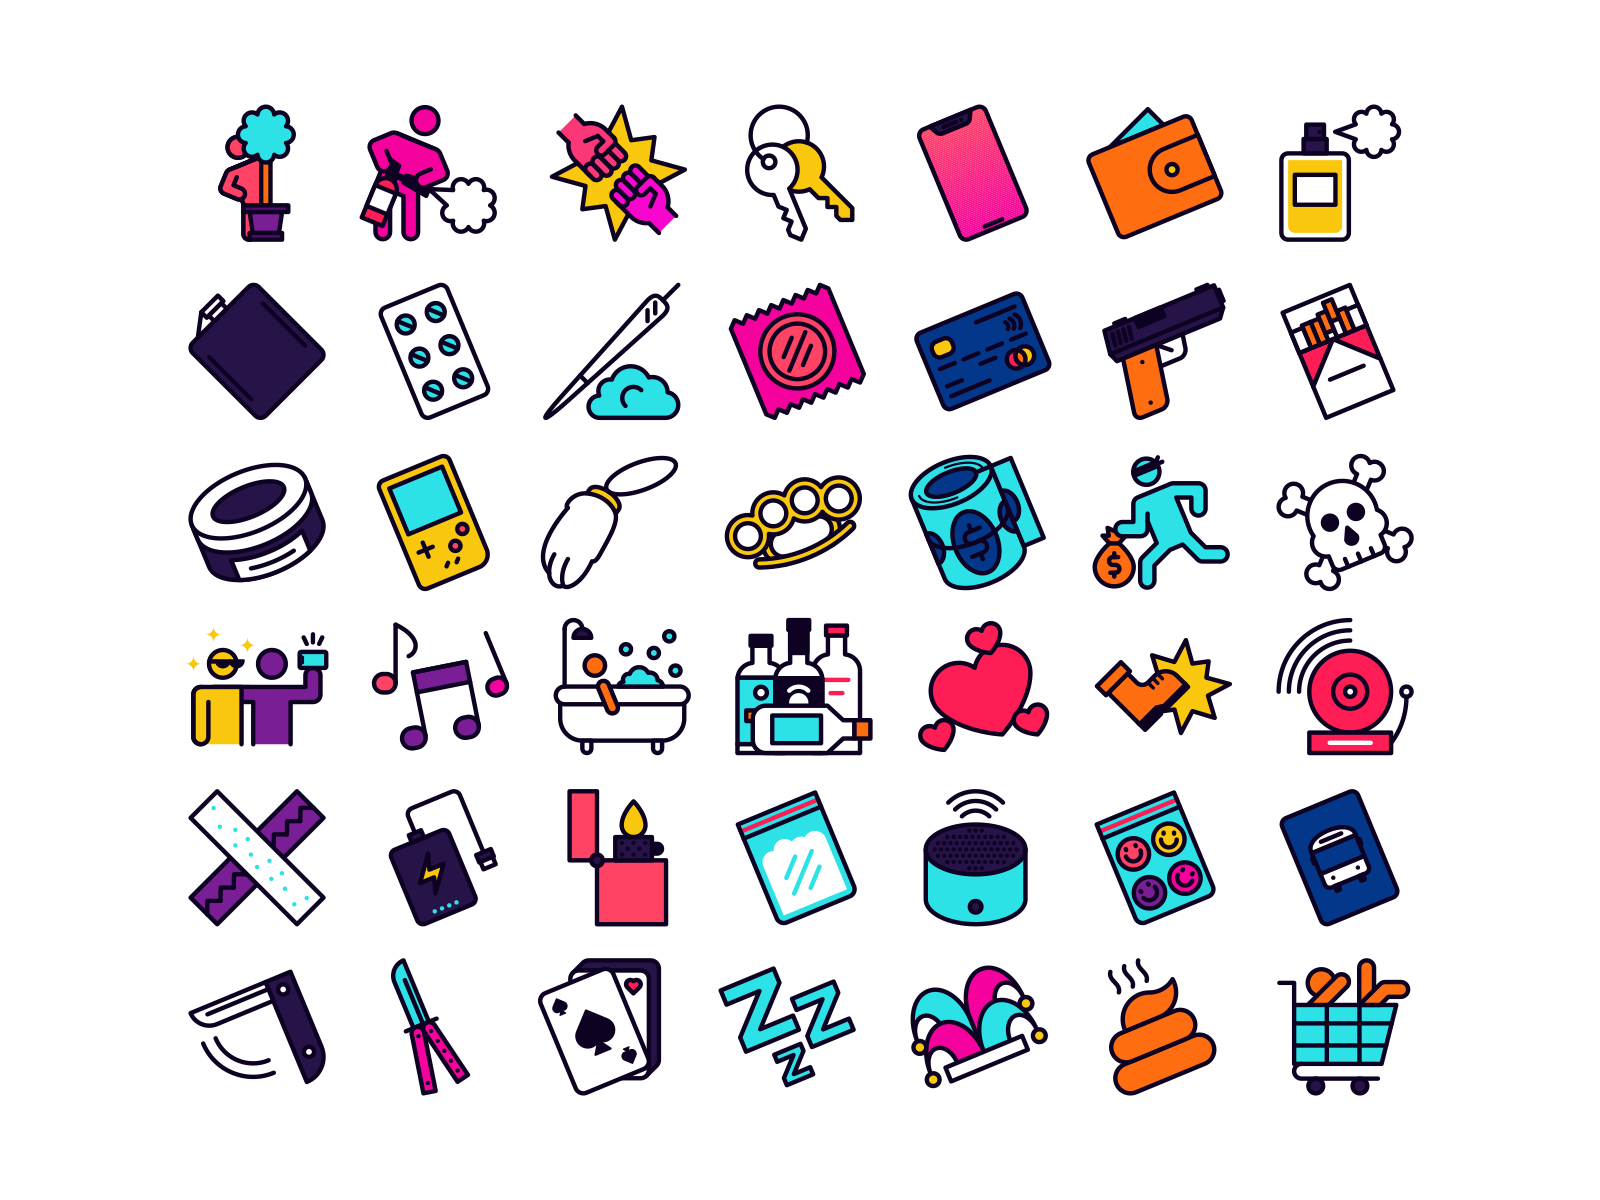 Crazy icons alcohol crazy danger design drugs fight fighting icon icons illustration line linear lines minimal minimalism minimalist minimalistic sex vector